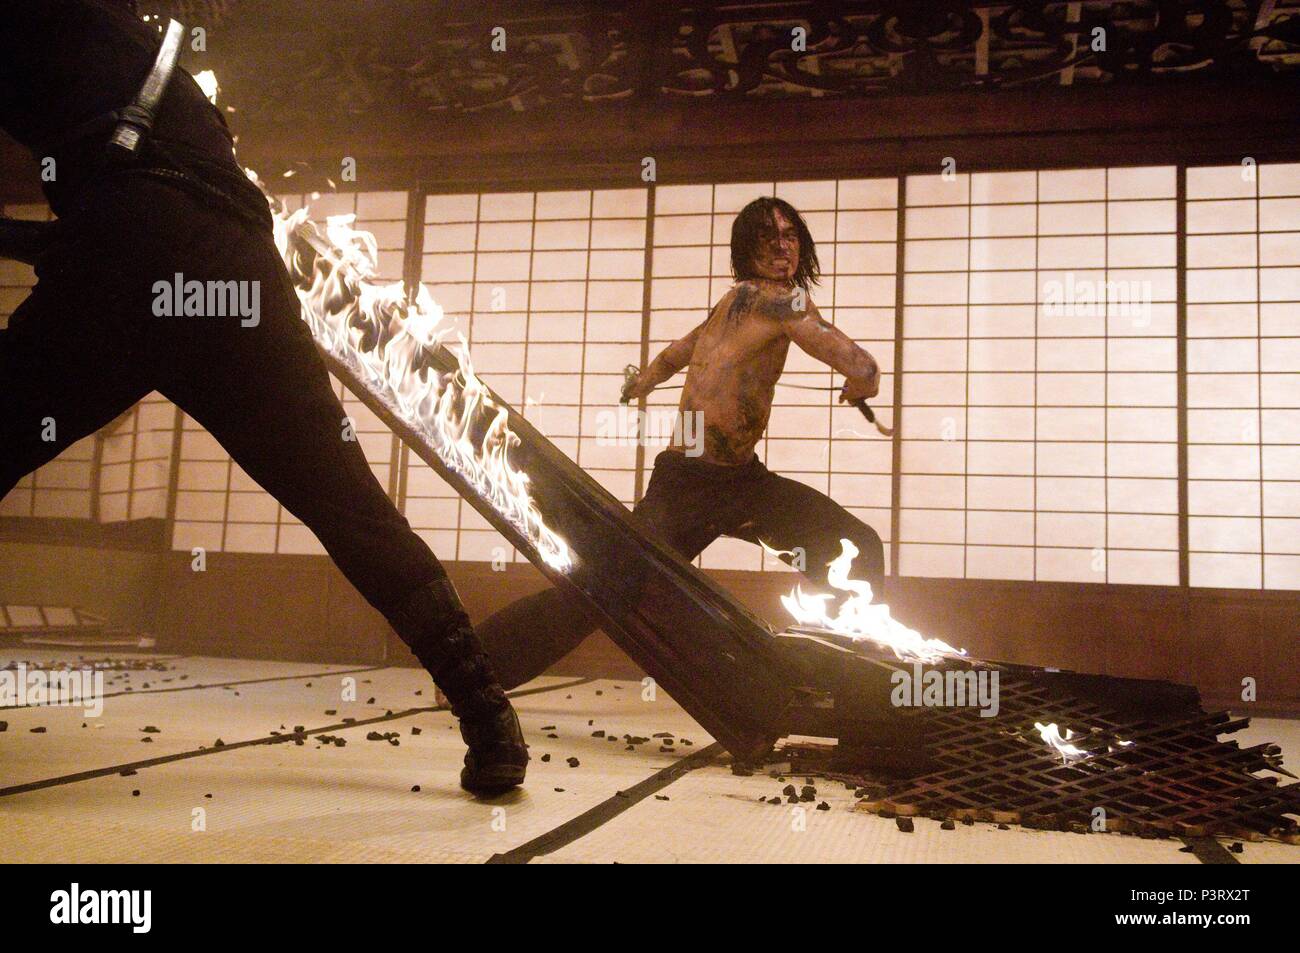 Ninja Assassin HD Wallpapers and Backgrounds